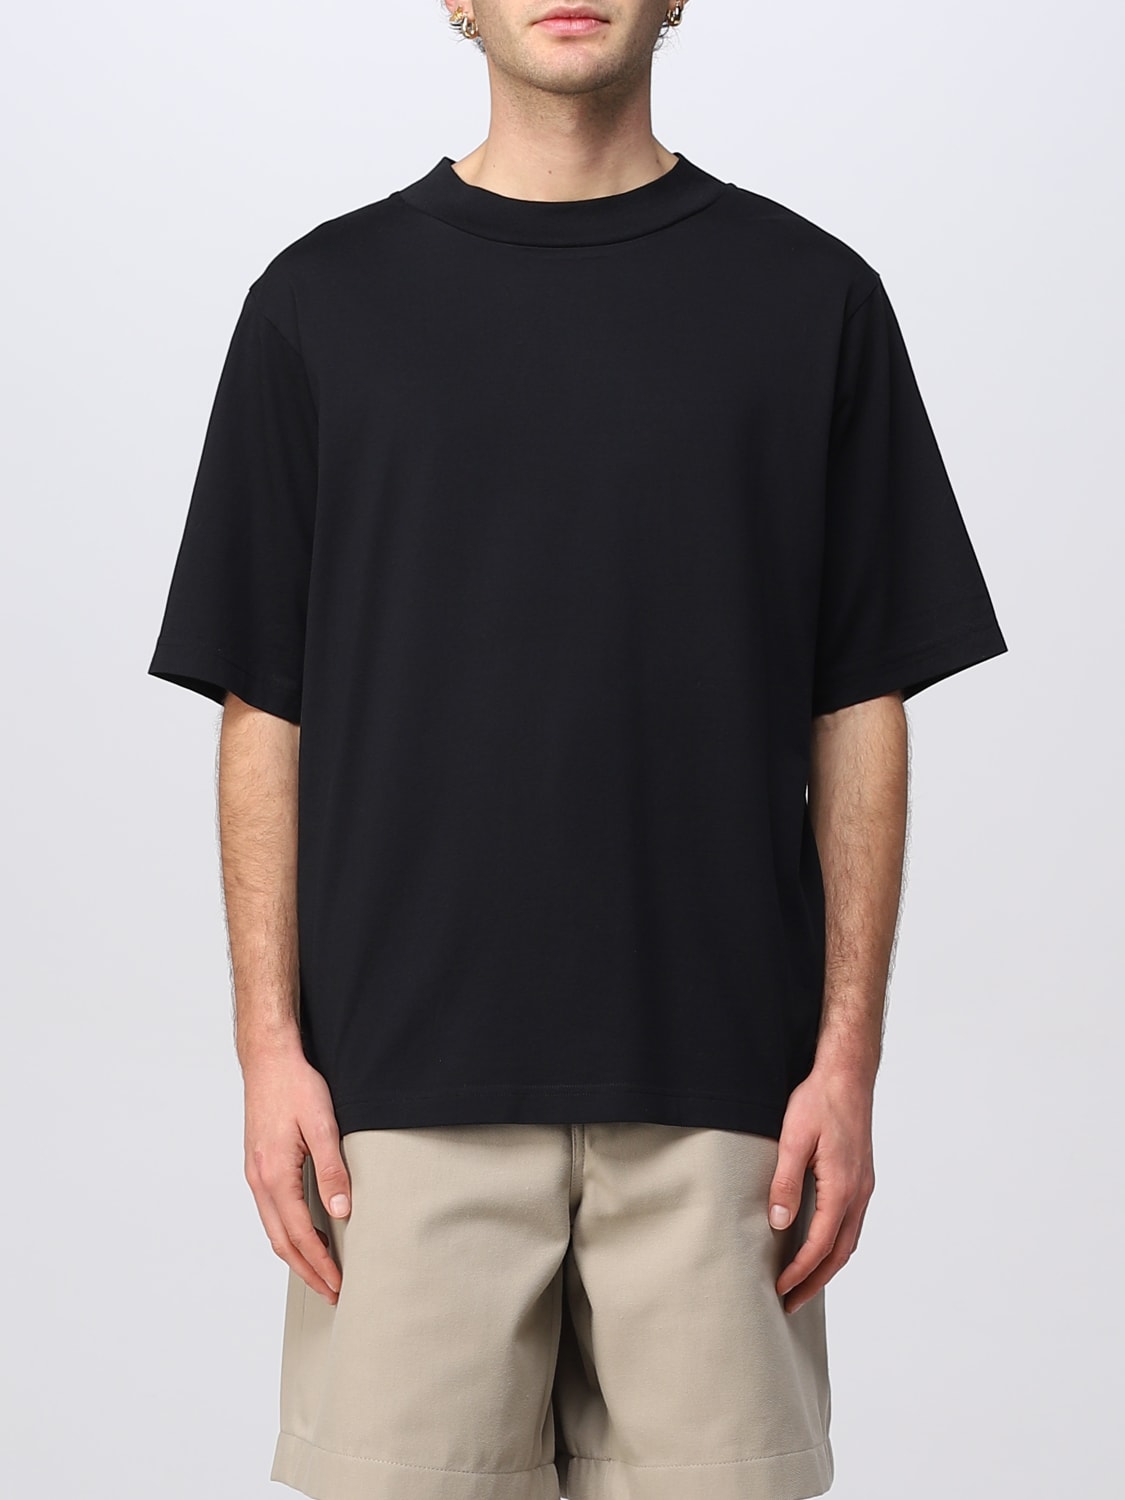 ACNE t-shirt - Black | Acne Studios CL0195 online on GIGLIO.COM